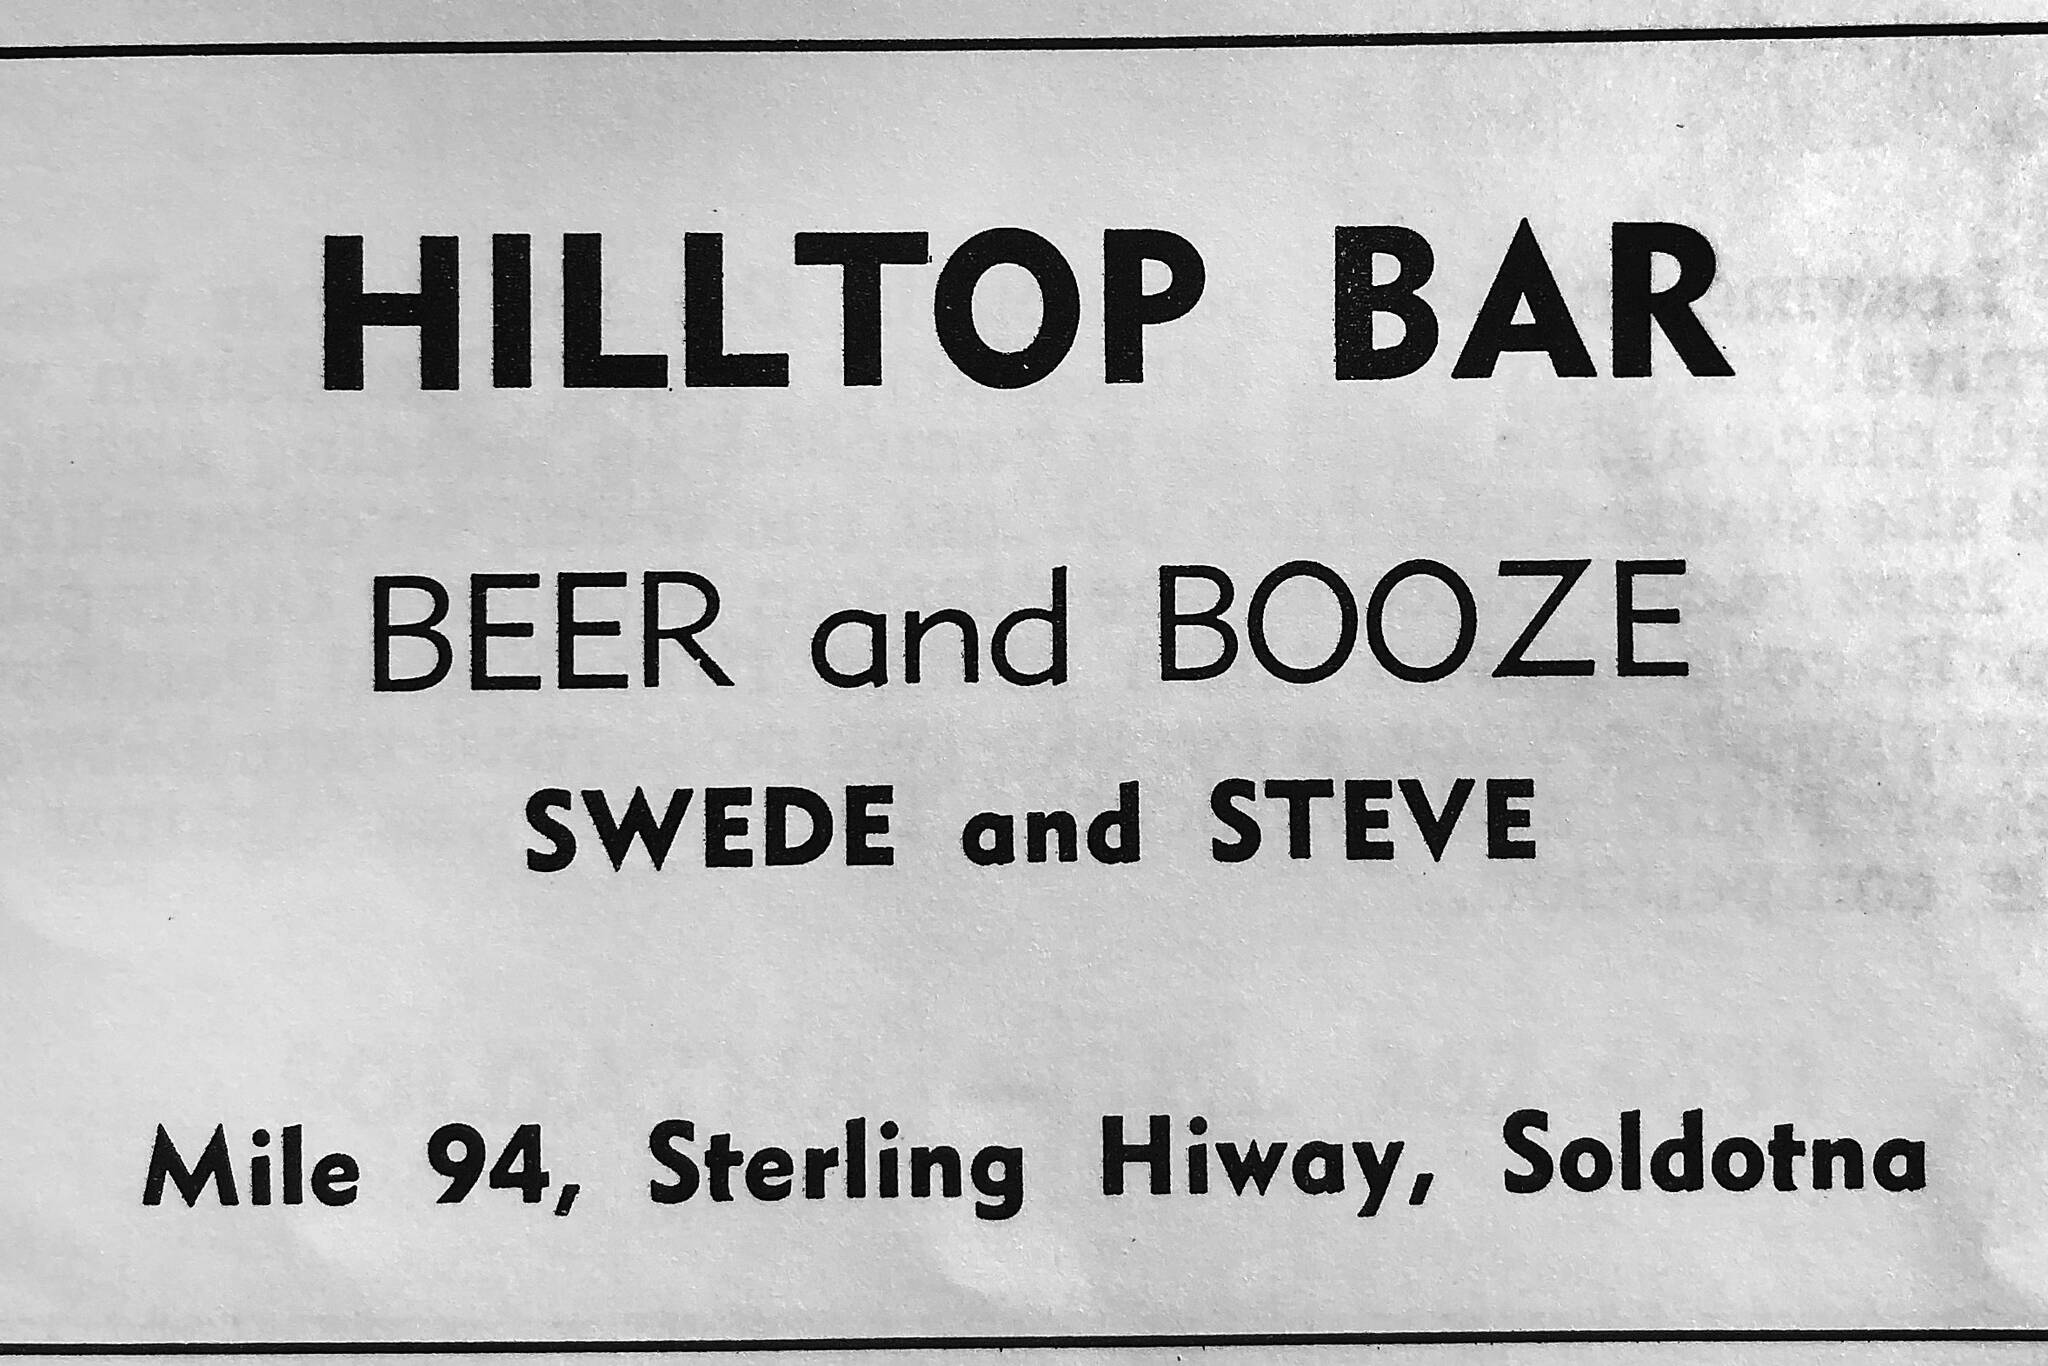 This advertisement for the Hilltop Bar and Café, the successor to the Circus Bar, appeared in 1962. The names under “Beer and Booze” refer to co-owners Swede Foss and Steve Henry King. (Advertisement contributed by Jim Taylor)